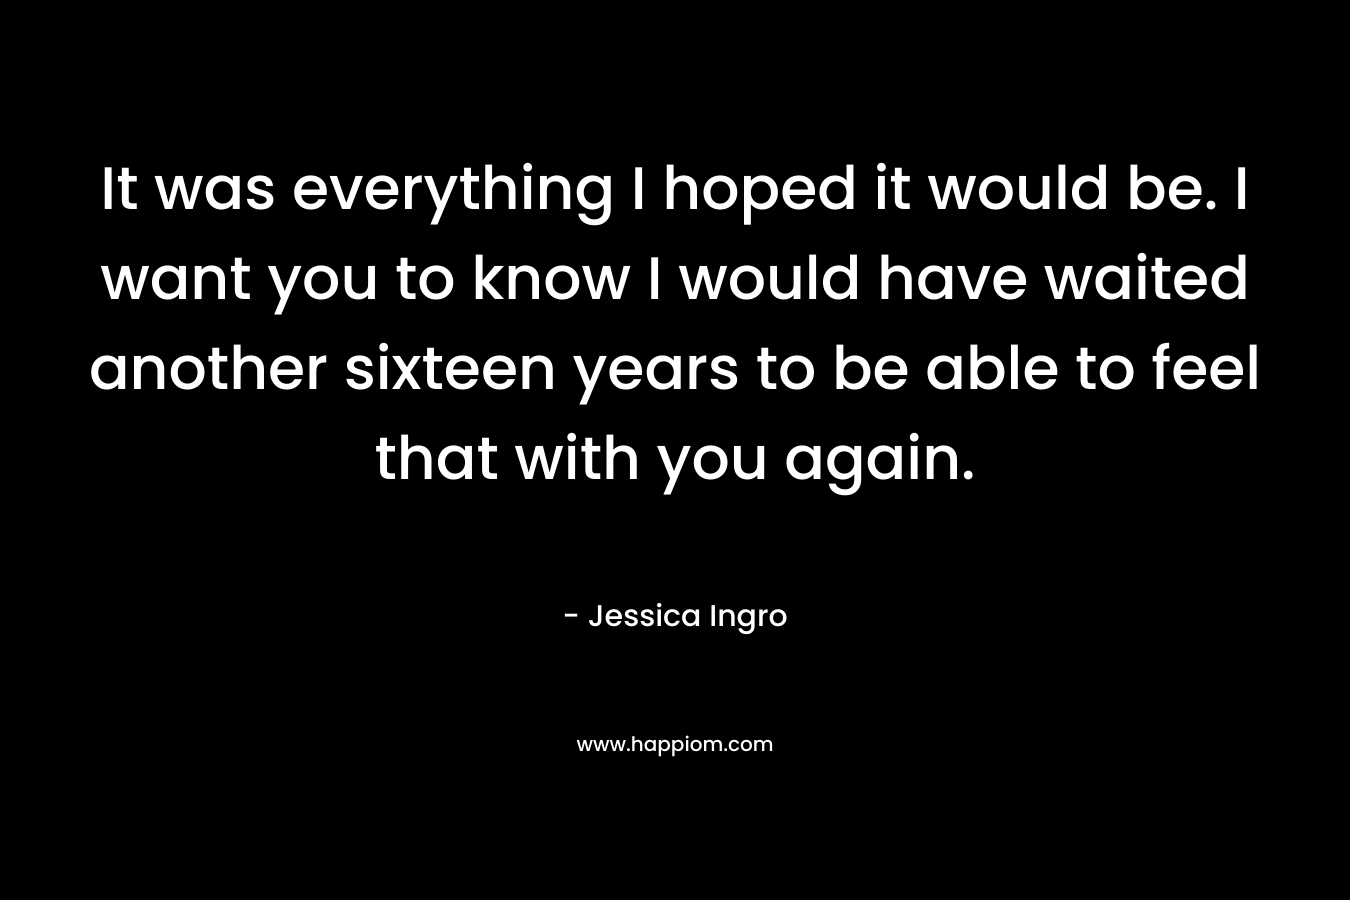 It was everything I hoped it would be. I want you to know I would have waited another sixteen years to be able to feel that with you again. – Jessica Ingro